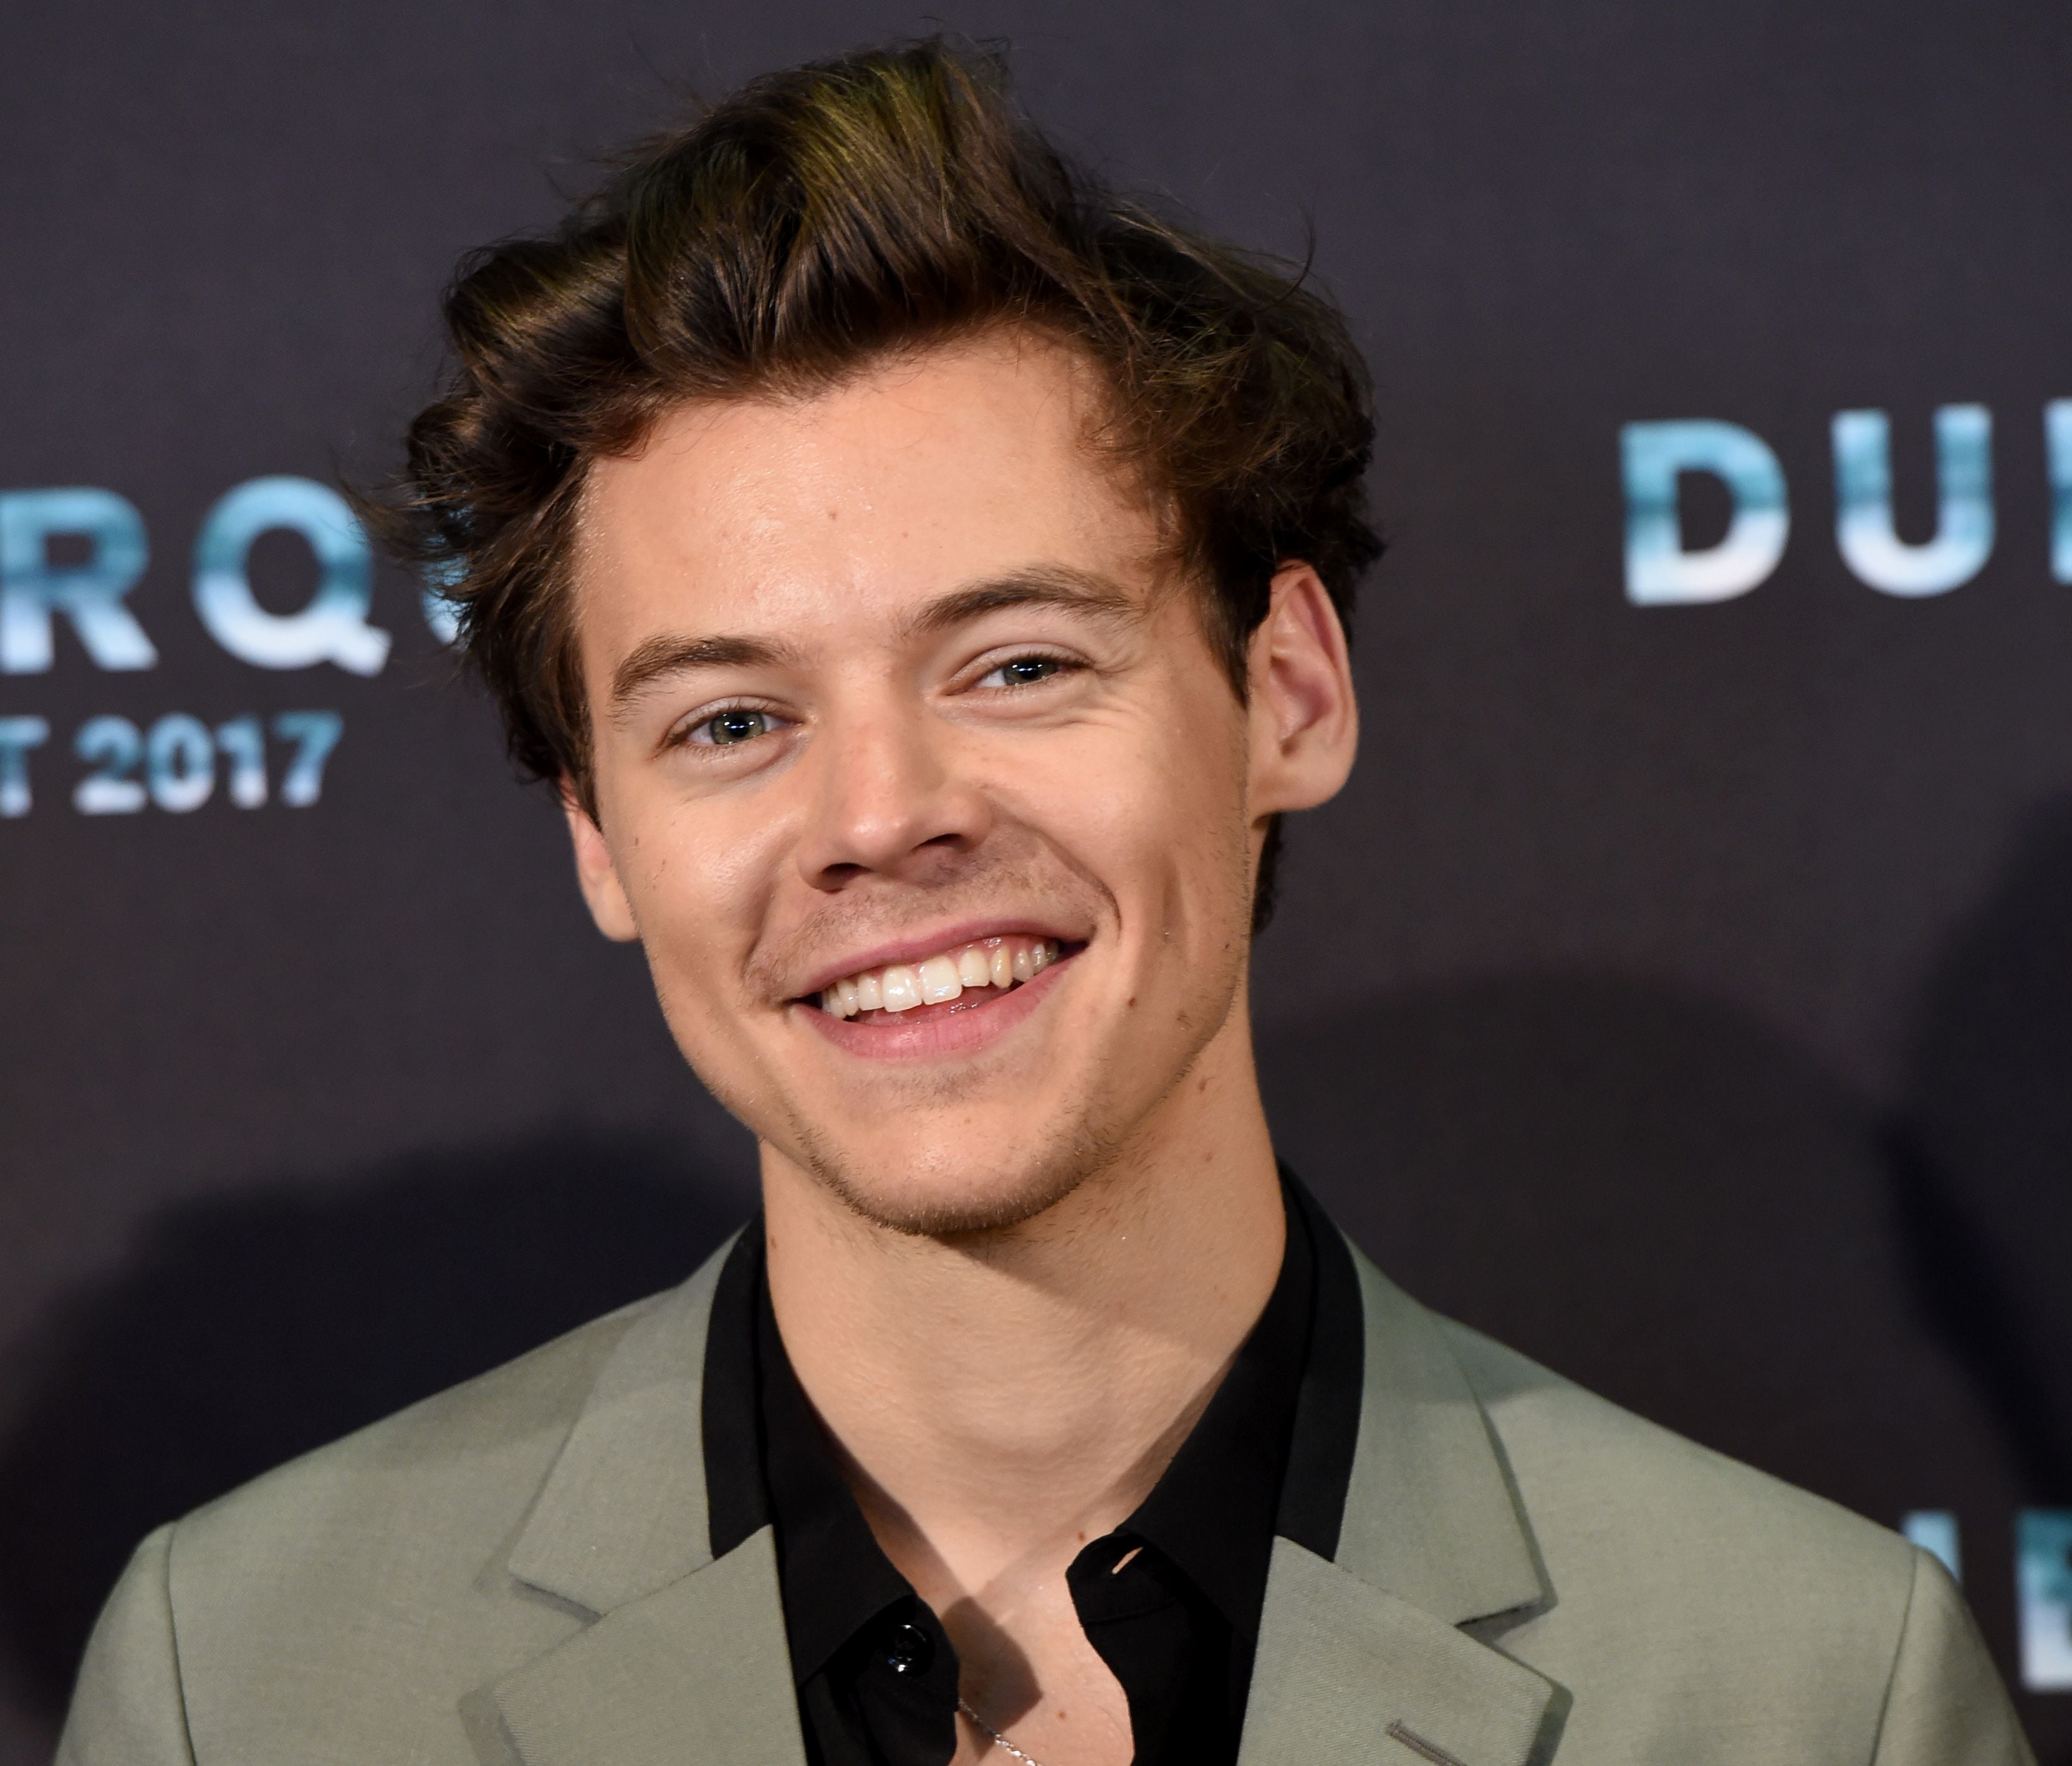 Harry Styles is selling T-shirts to help fight coronavirus